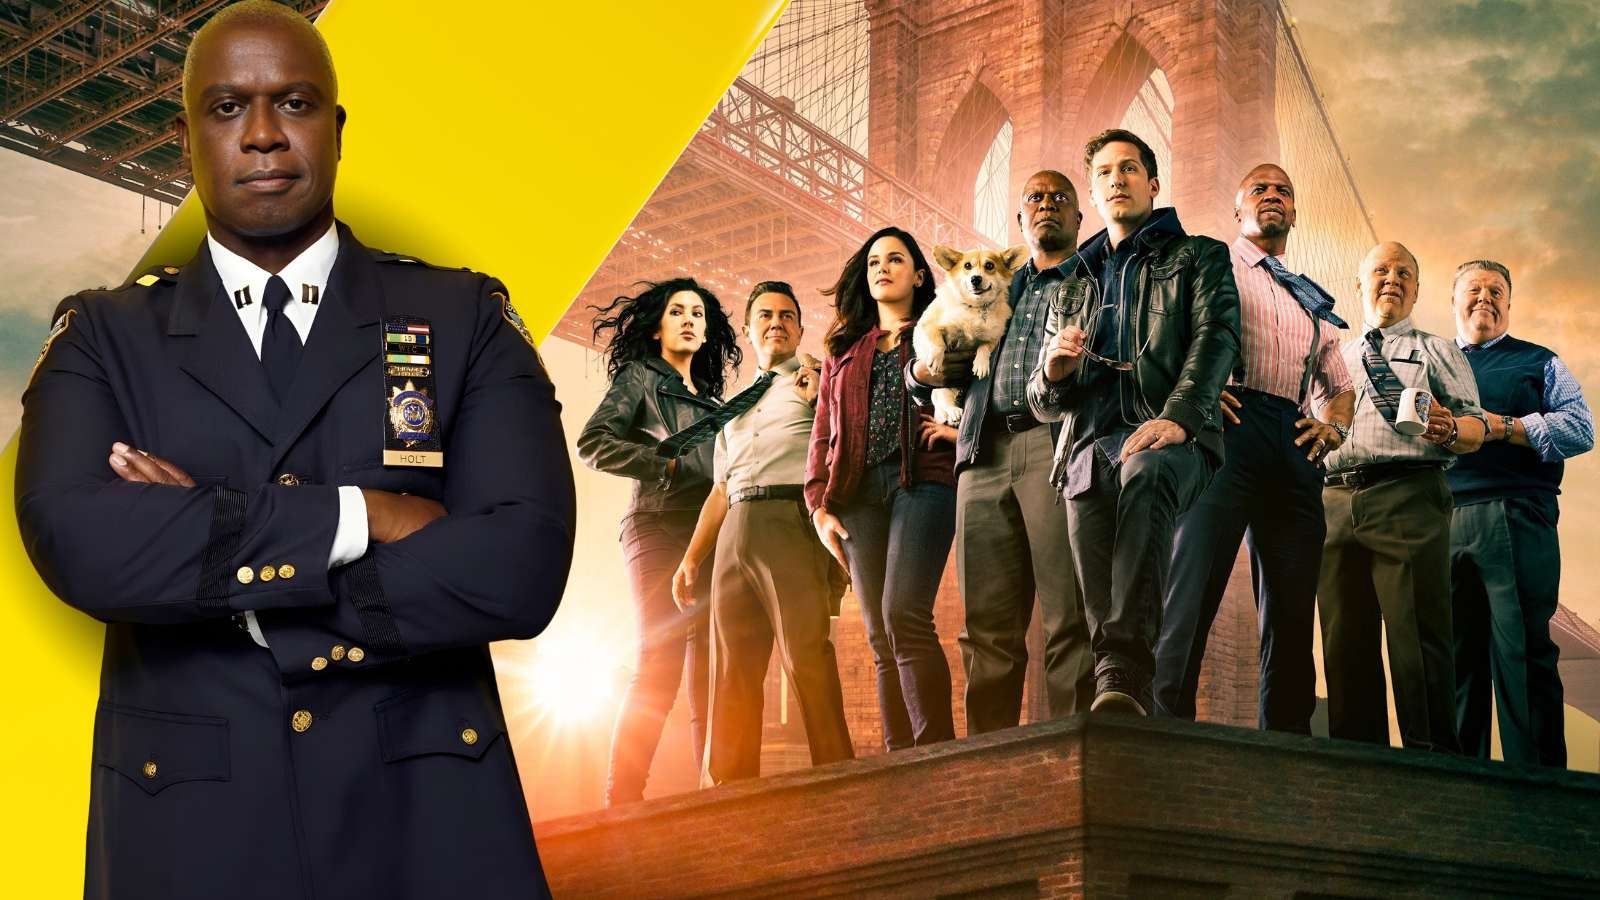 “Gotta keep ’em on they toes”: Late ‘Brooklyn Nine-Nine’ Actor Terrorized the Crew on Set With His Suspicious Antics